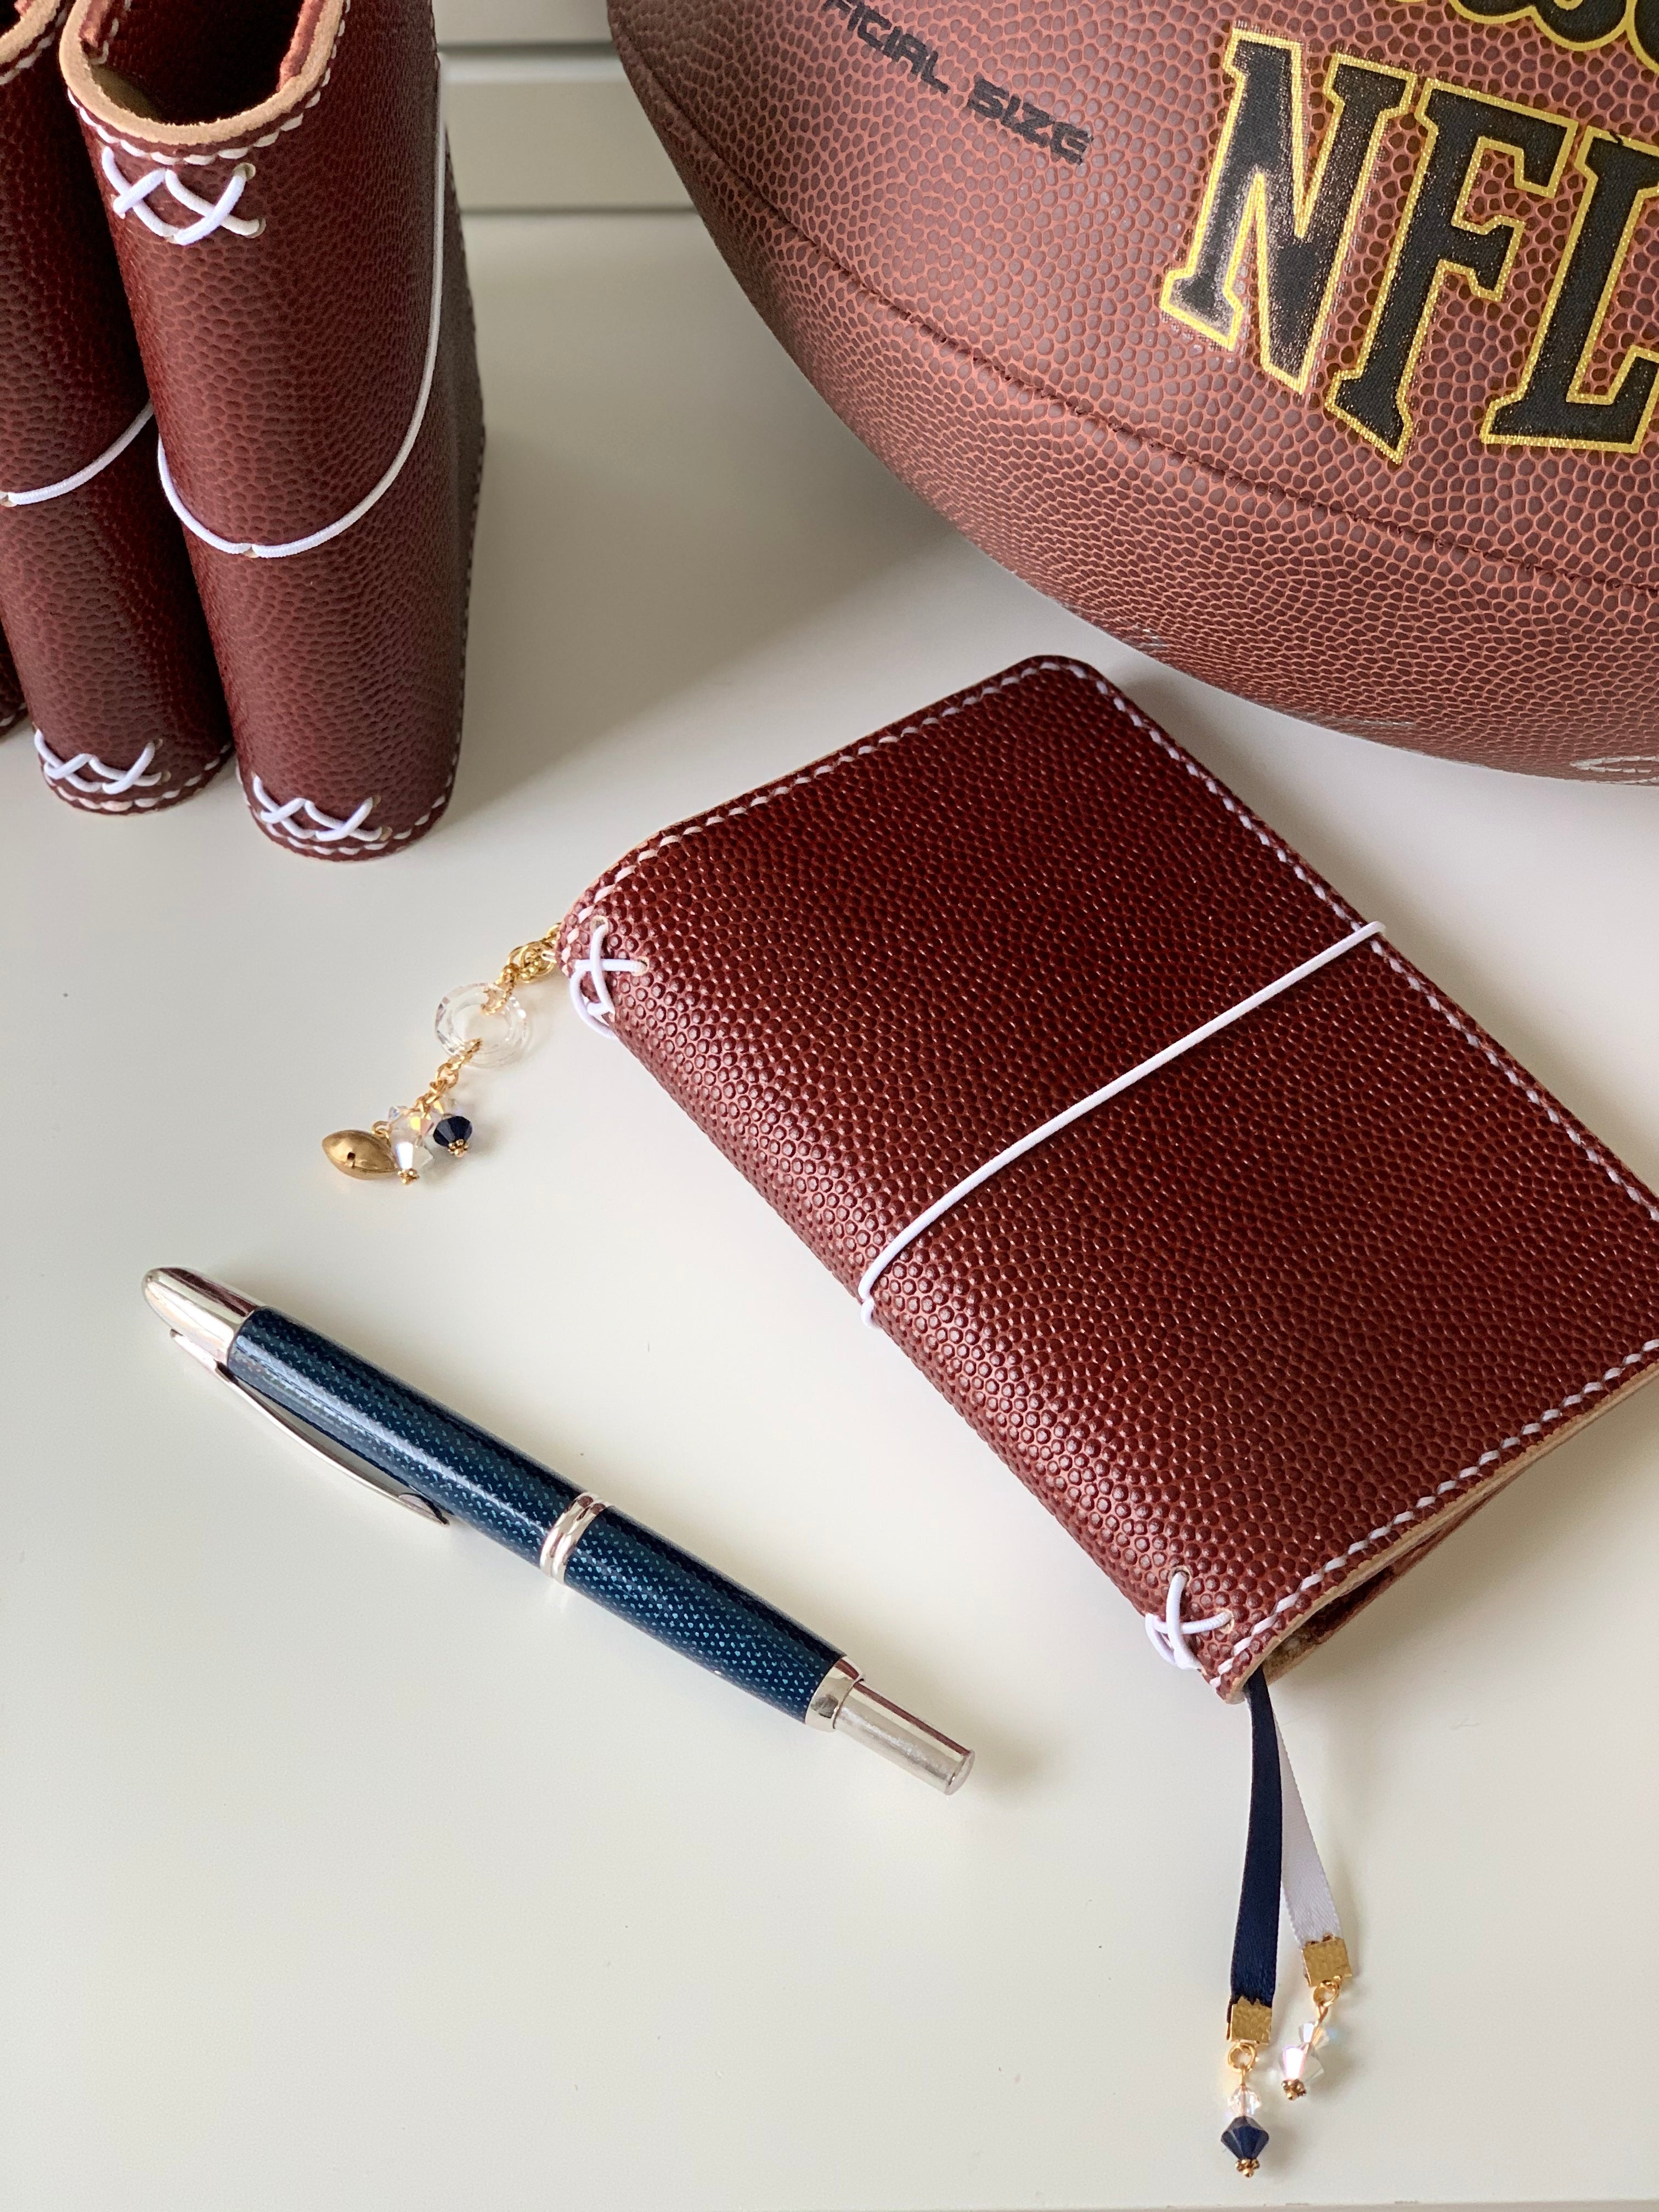 Football Leather with Pockets